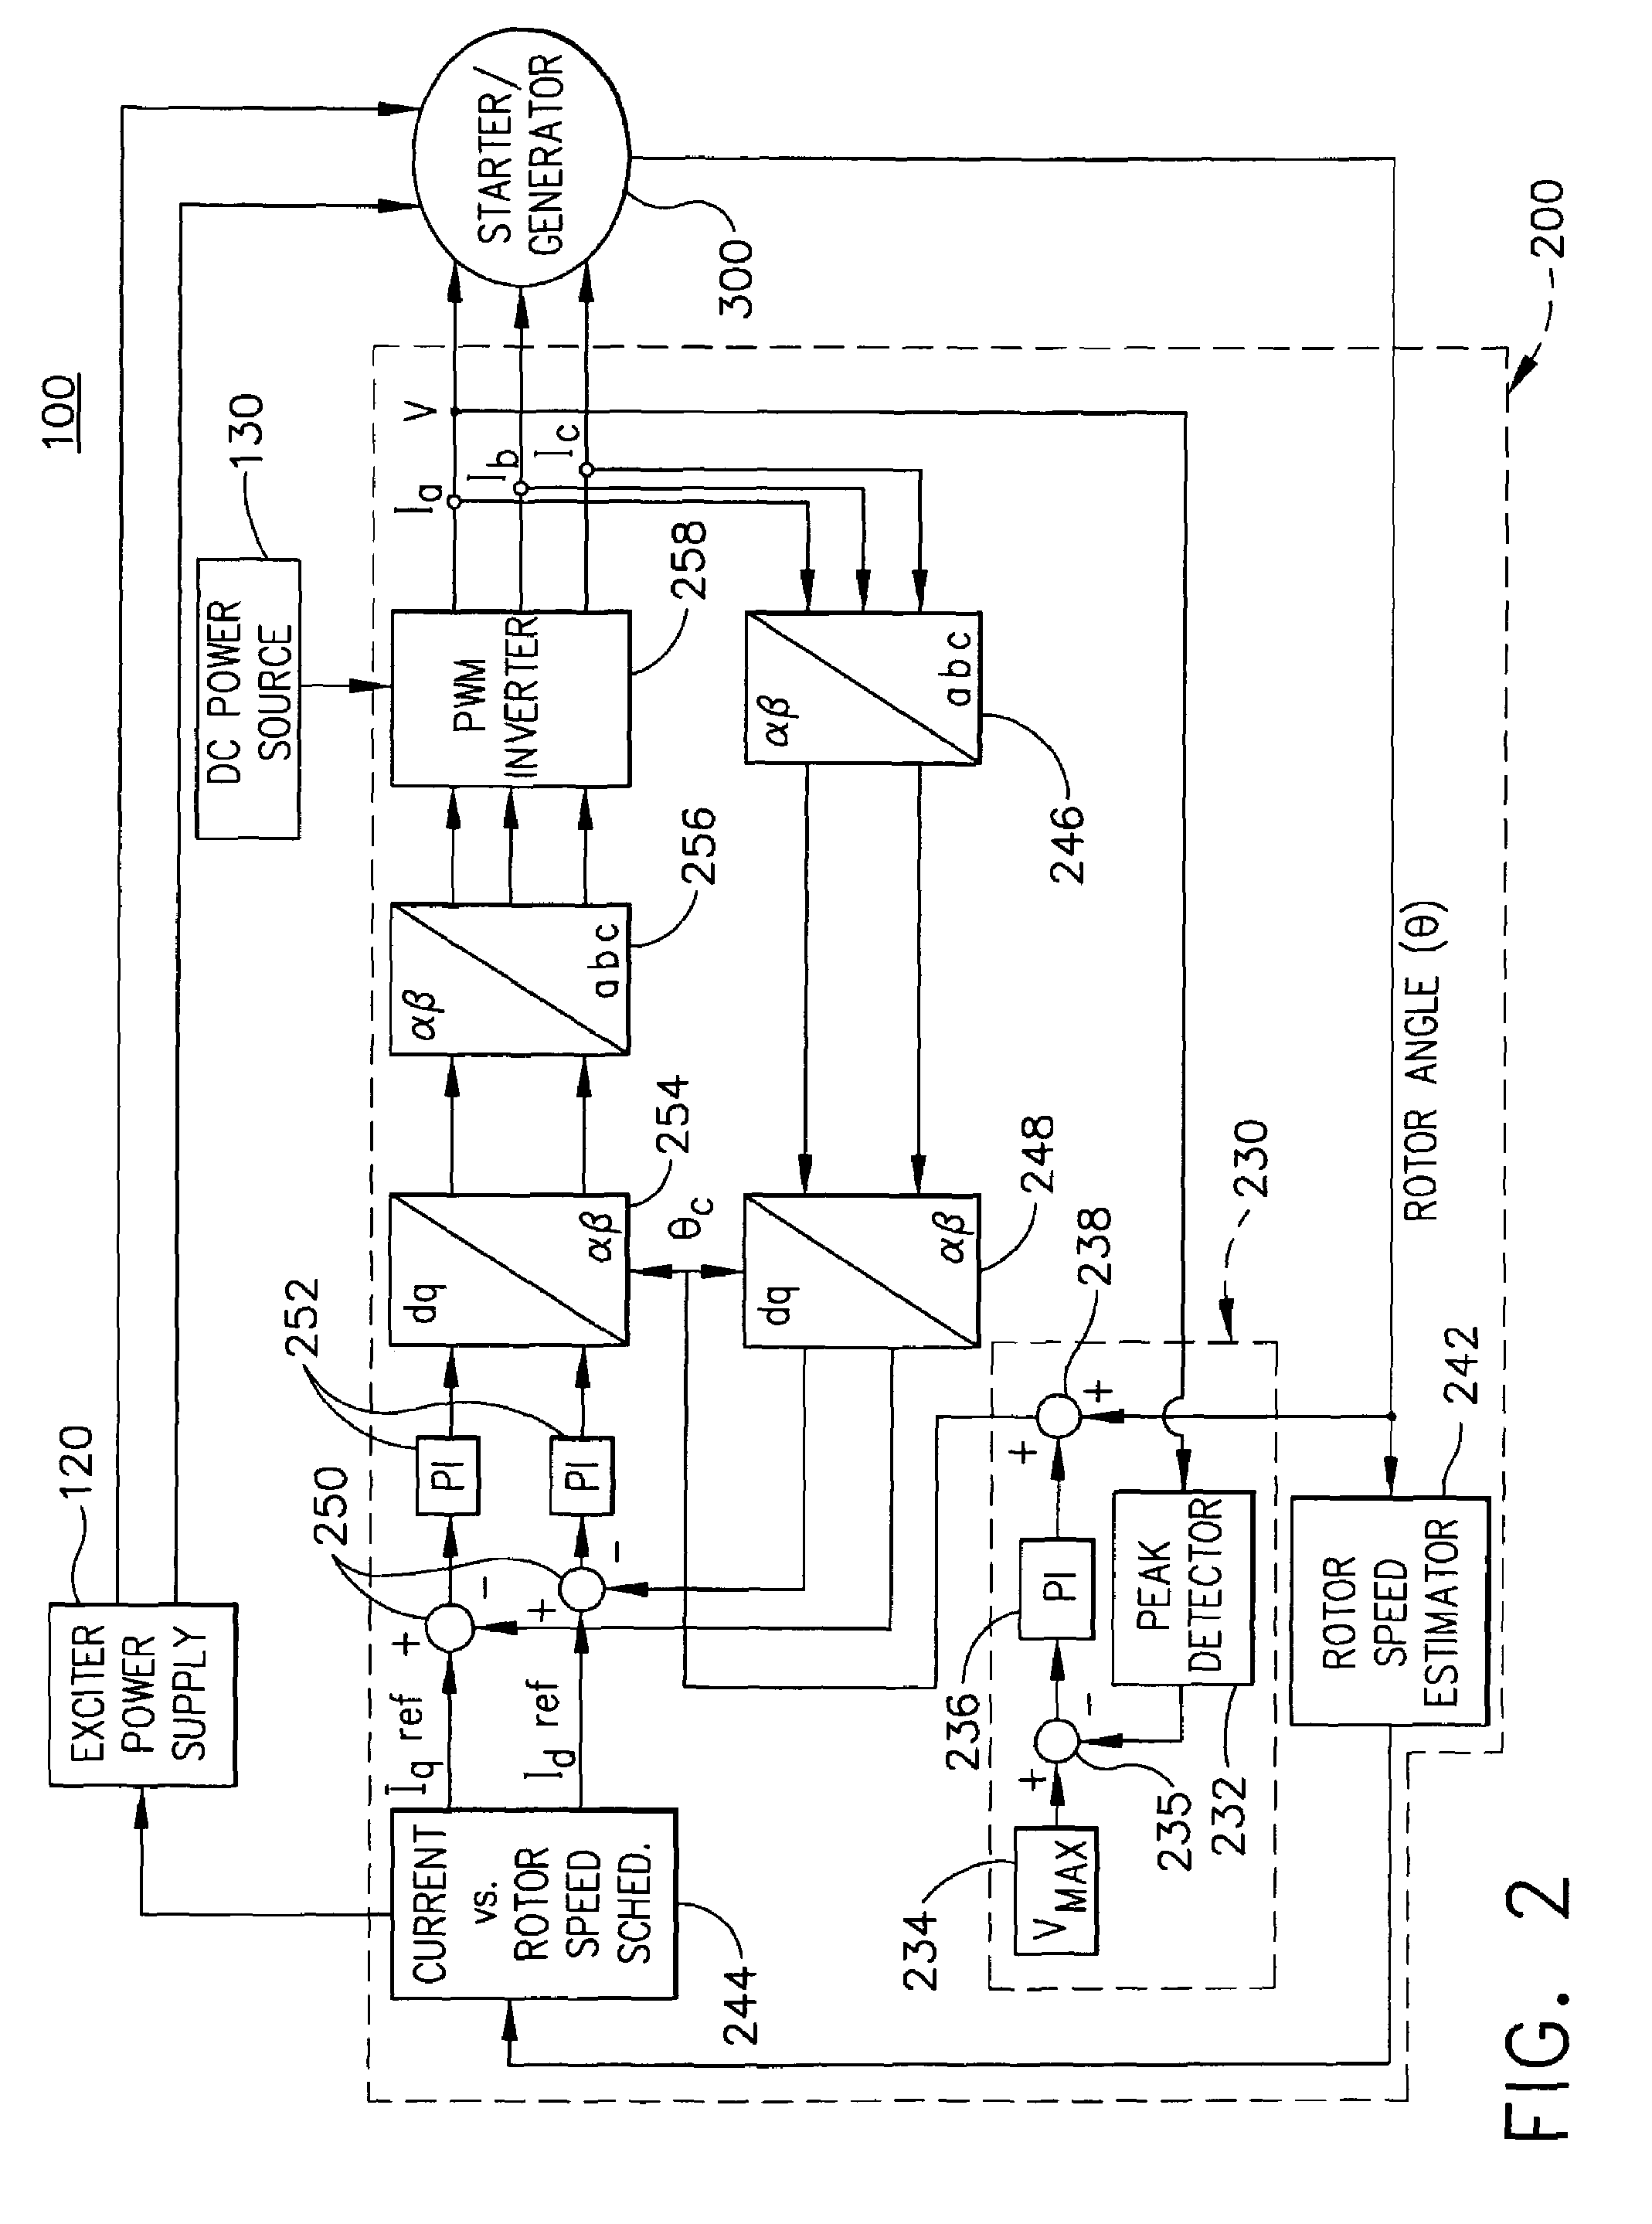 Apparatus and method to control torque and voltage of an AC machine